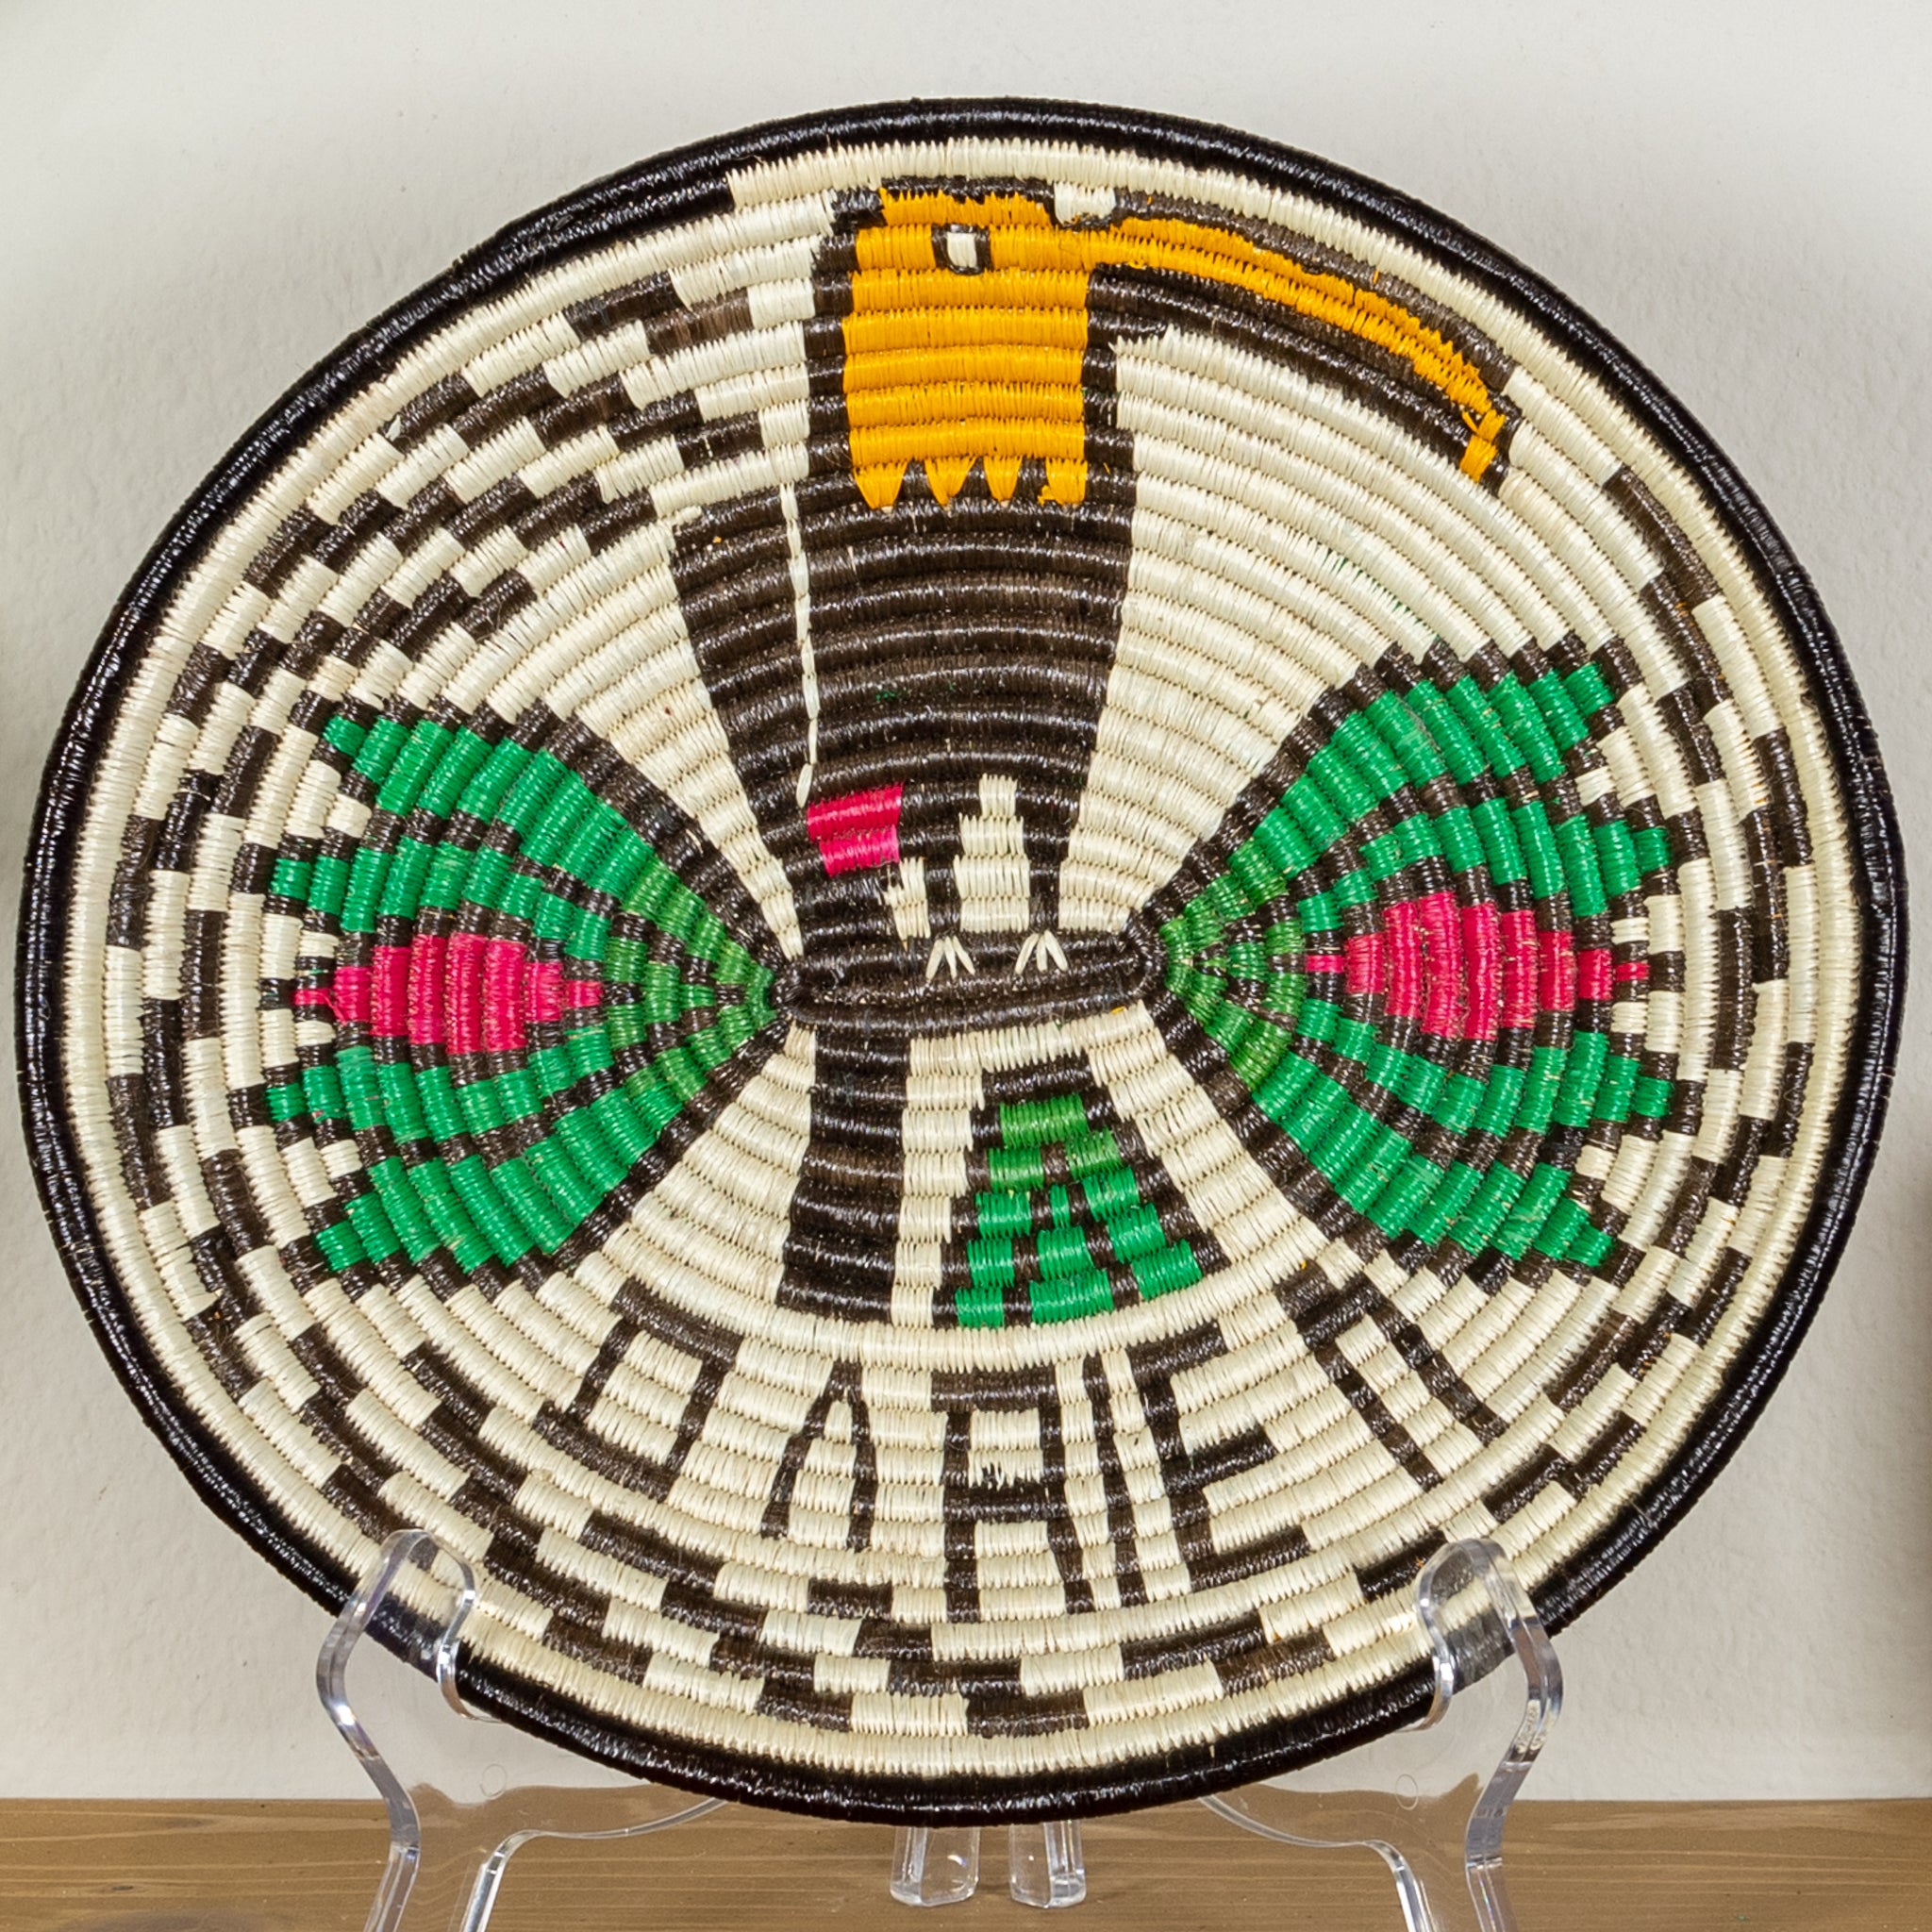 Black Gold And Green Toucan Basket Plate